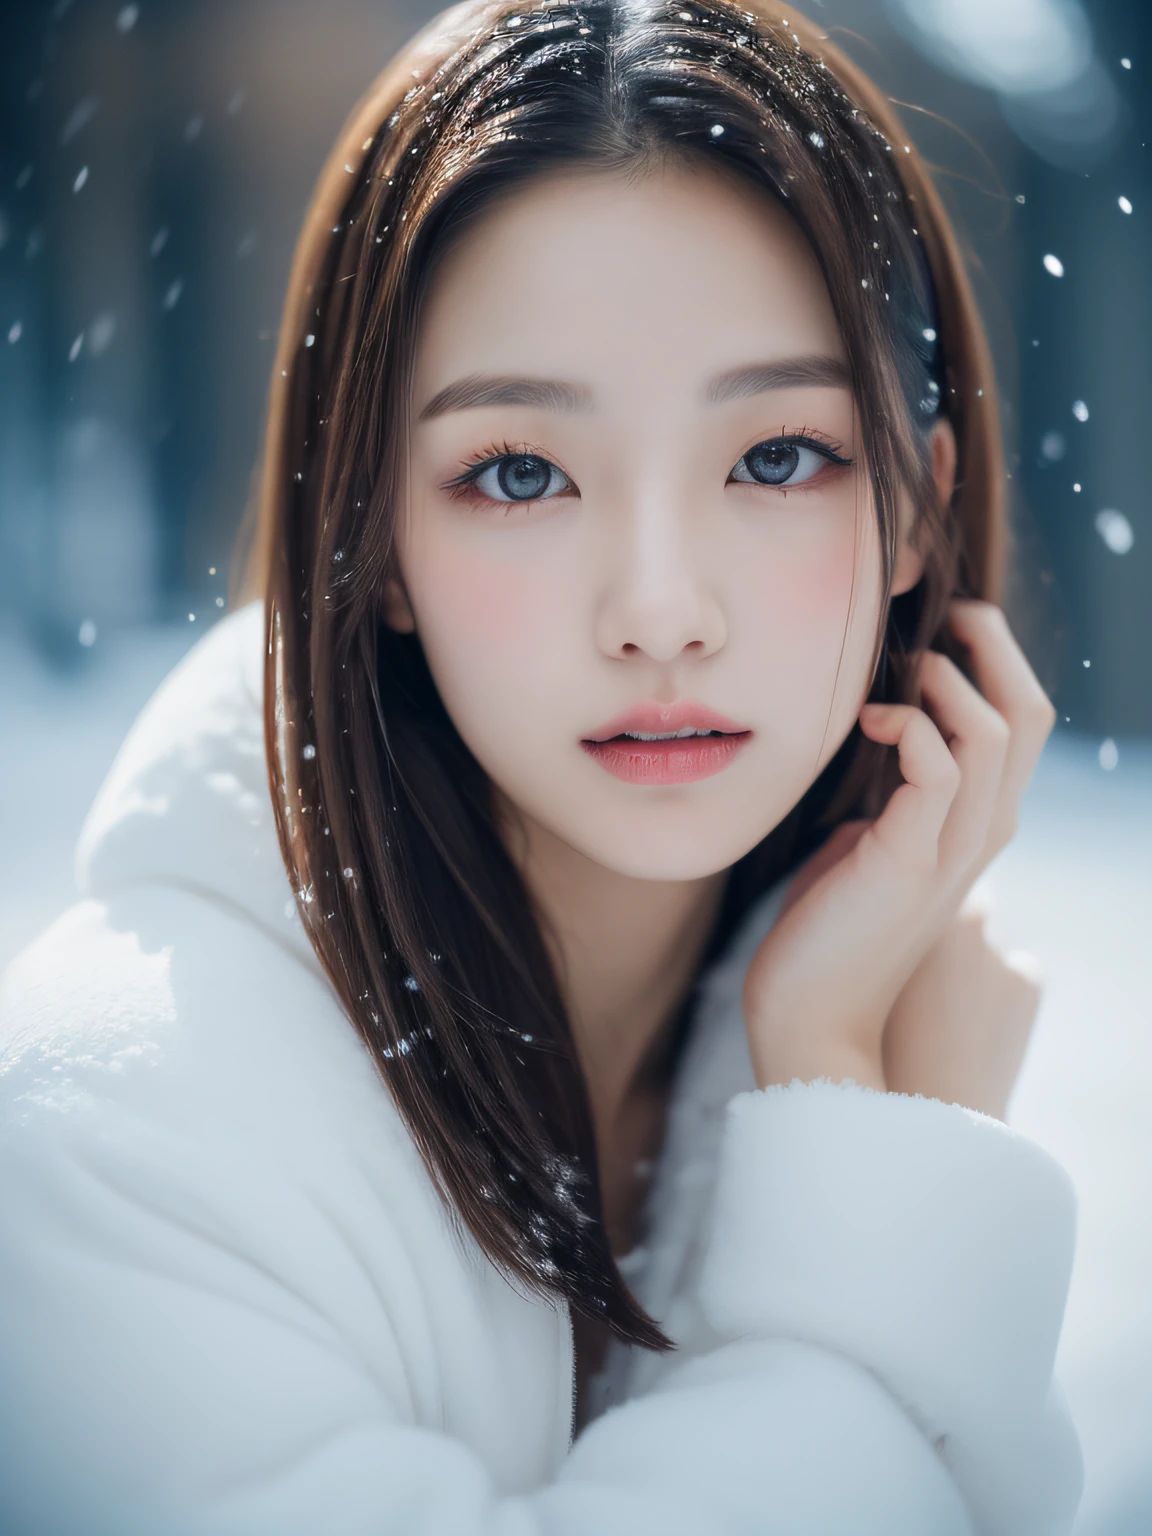 In the snowy city、Close up of woman posing for photo, Middle metaverse, Yoshitomo Nara, Japanese Models, Beautiful Asian Girl, With short hair, 2 4 years old female model, 4 K ], 4K], 2 7 years old, sakimichan, sakimichan